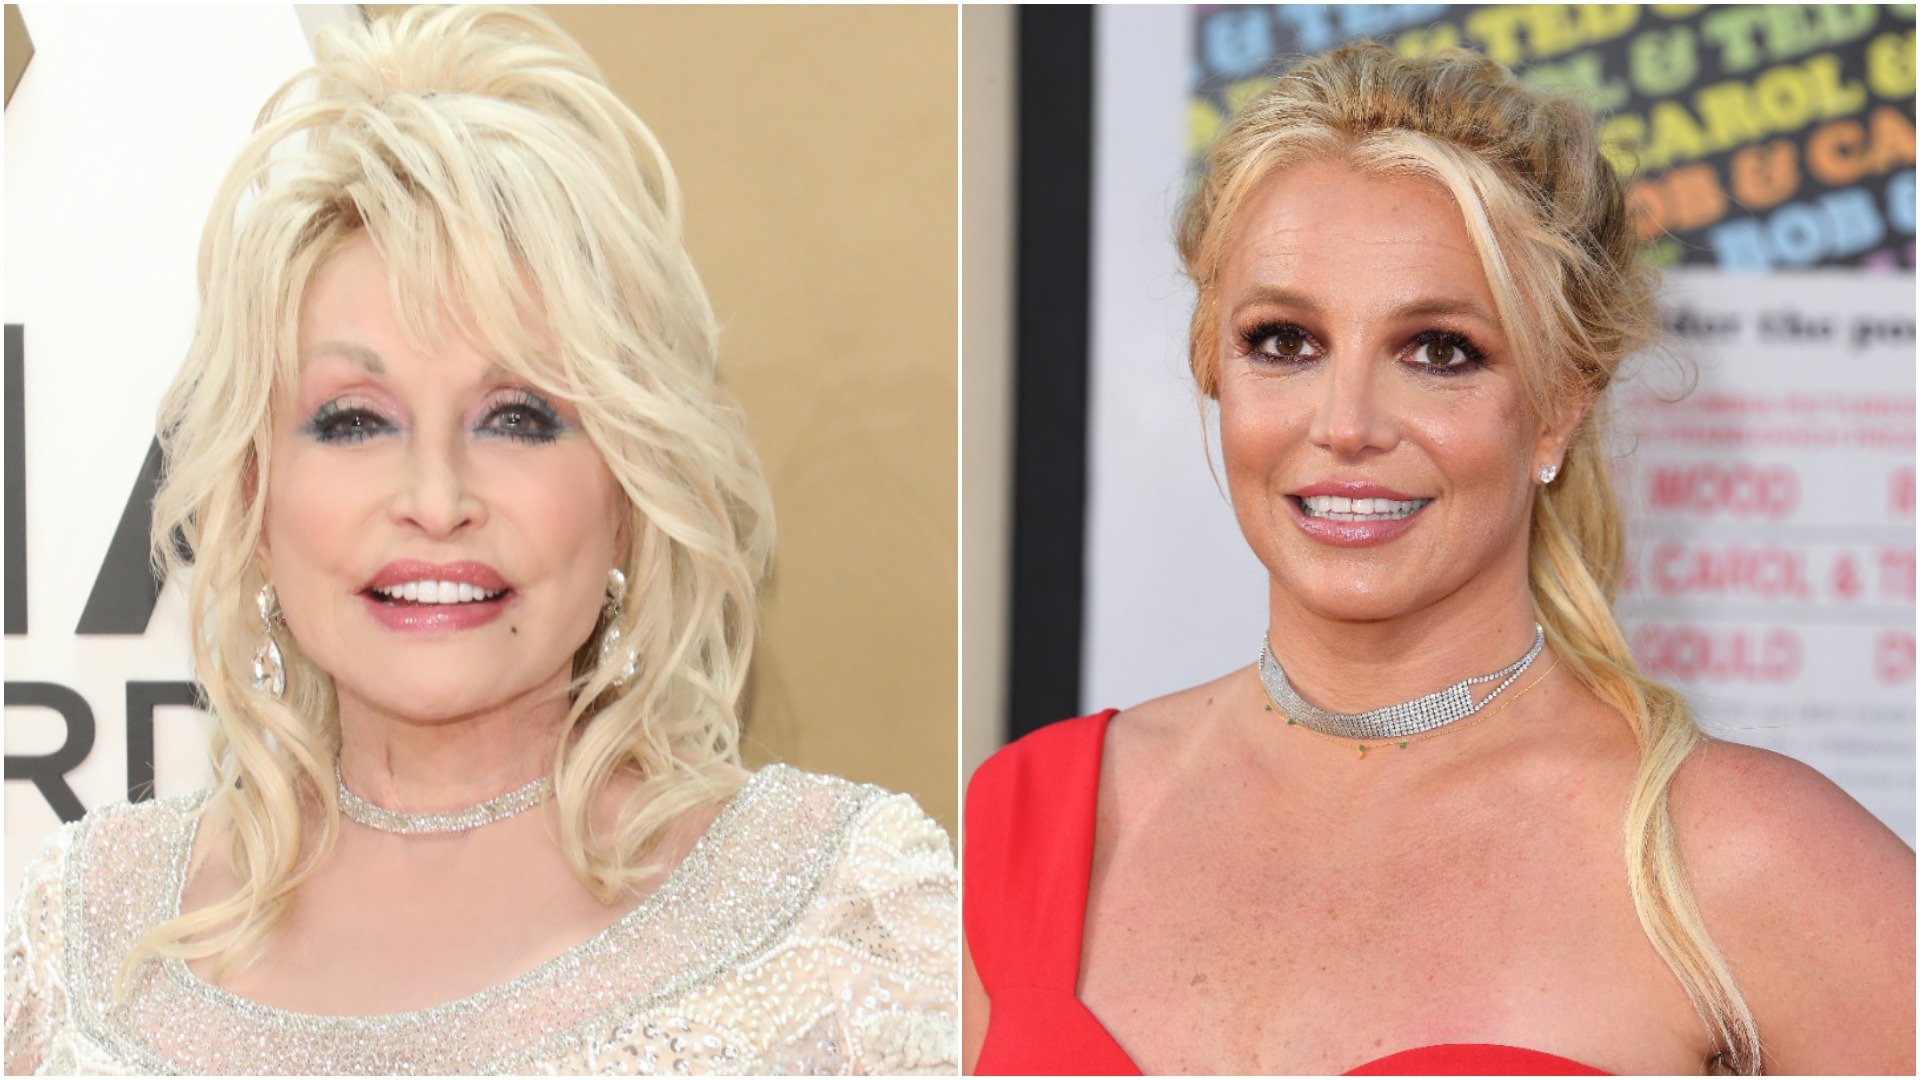 A collage image of Dolly Parton and Britney Spears